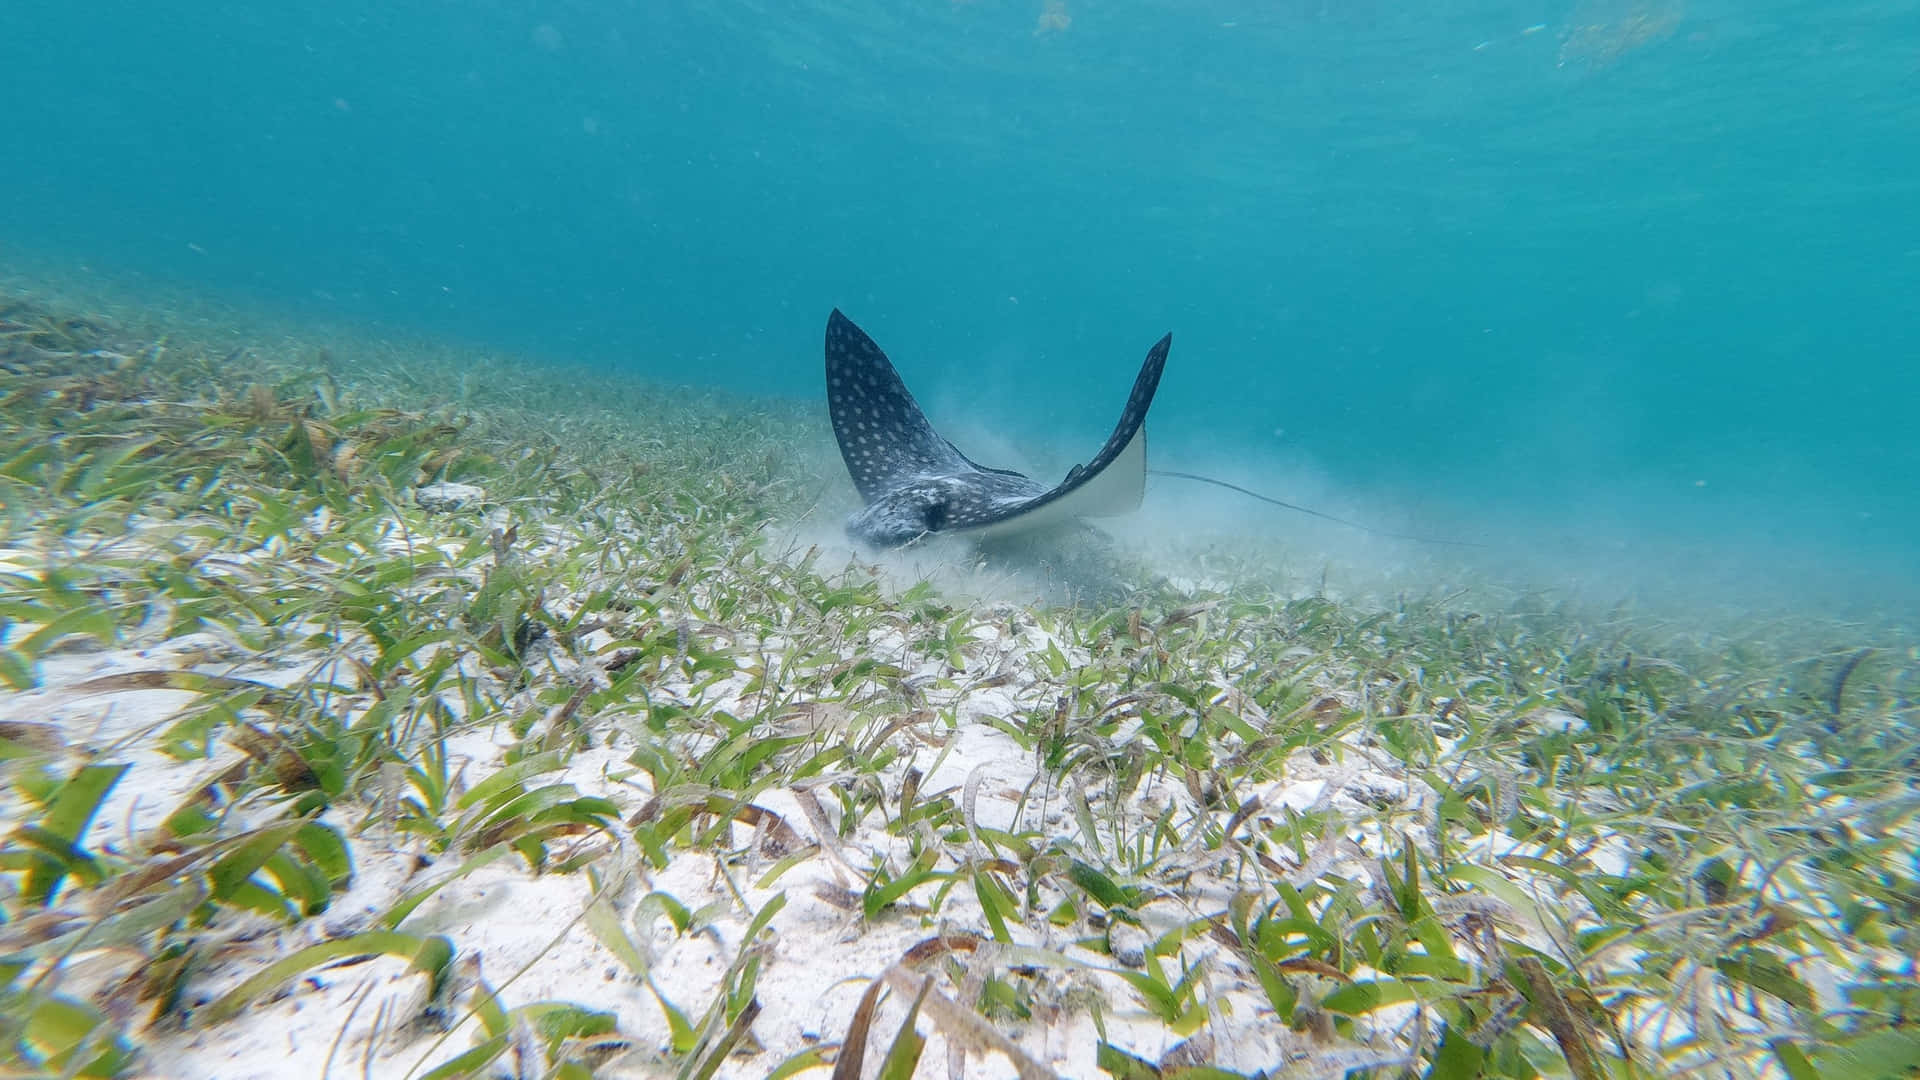 Eagle Ray Over Seagrass Bed Wallpaper